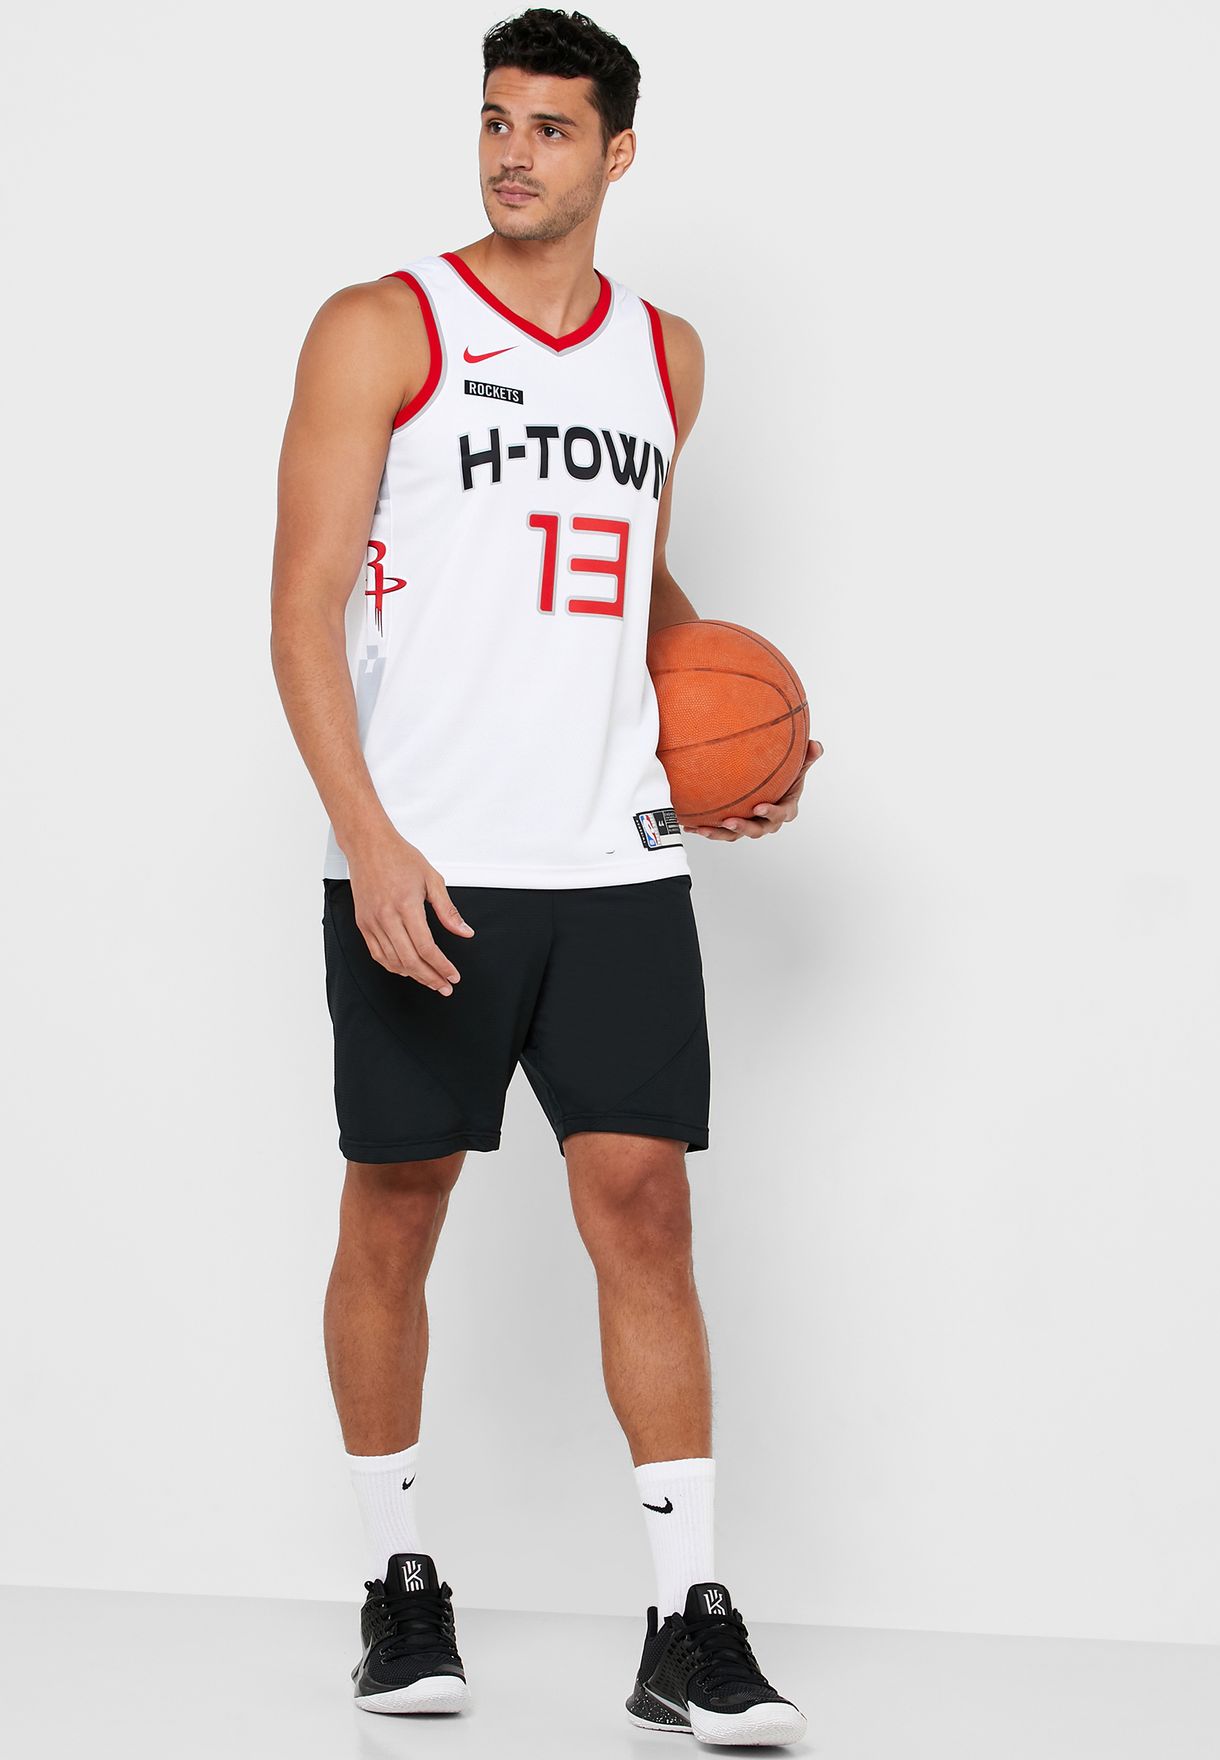 james harden jersey and shorts